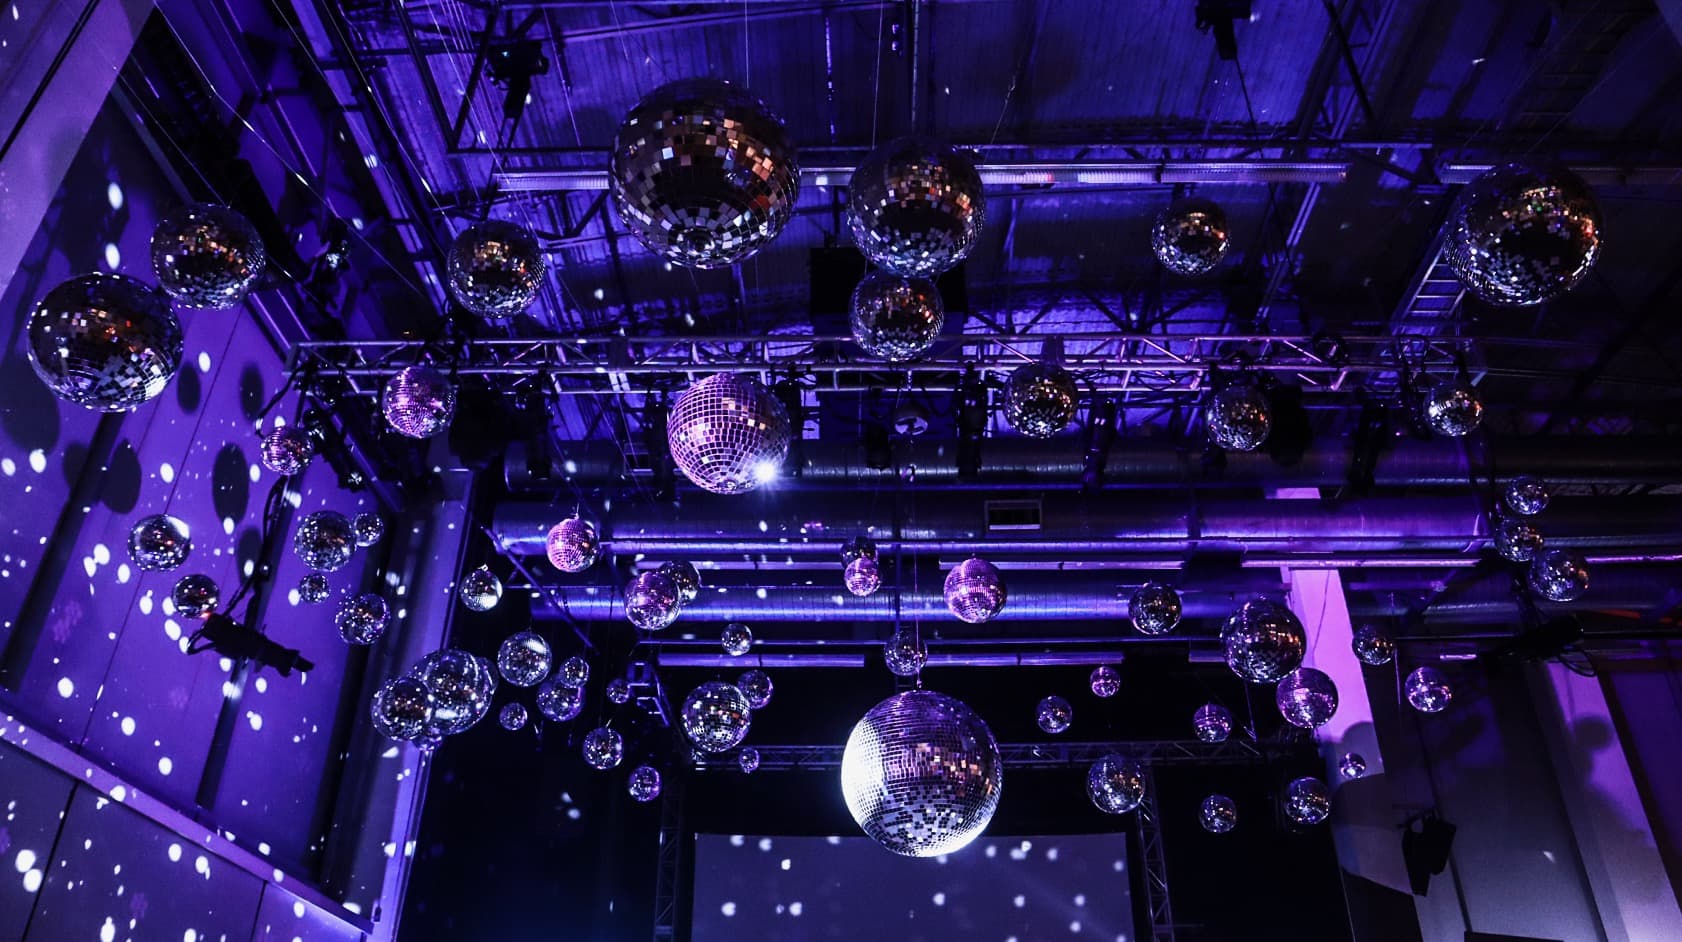 Verizon holiday party at the Yahoo Headquarters. Several mirror balls of varying sizes are hanging at different heights from an industrial style ceiling. The mirror balls are set in front of a purple color wash with some hints of magenta throughout.